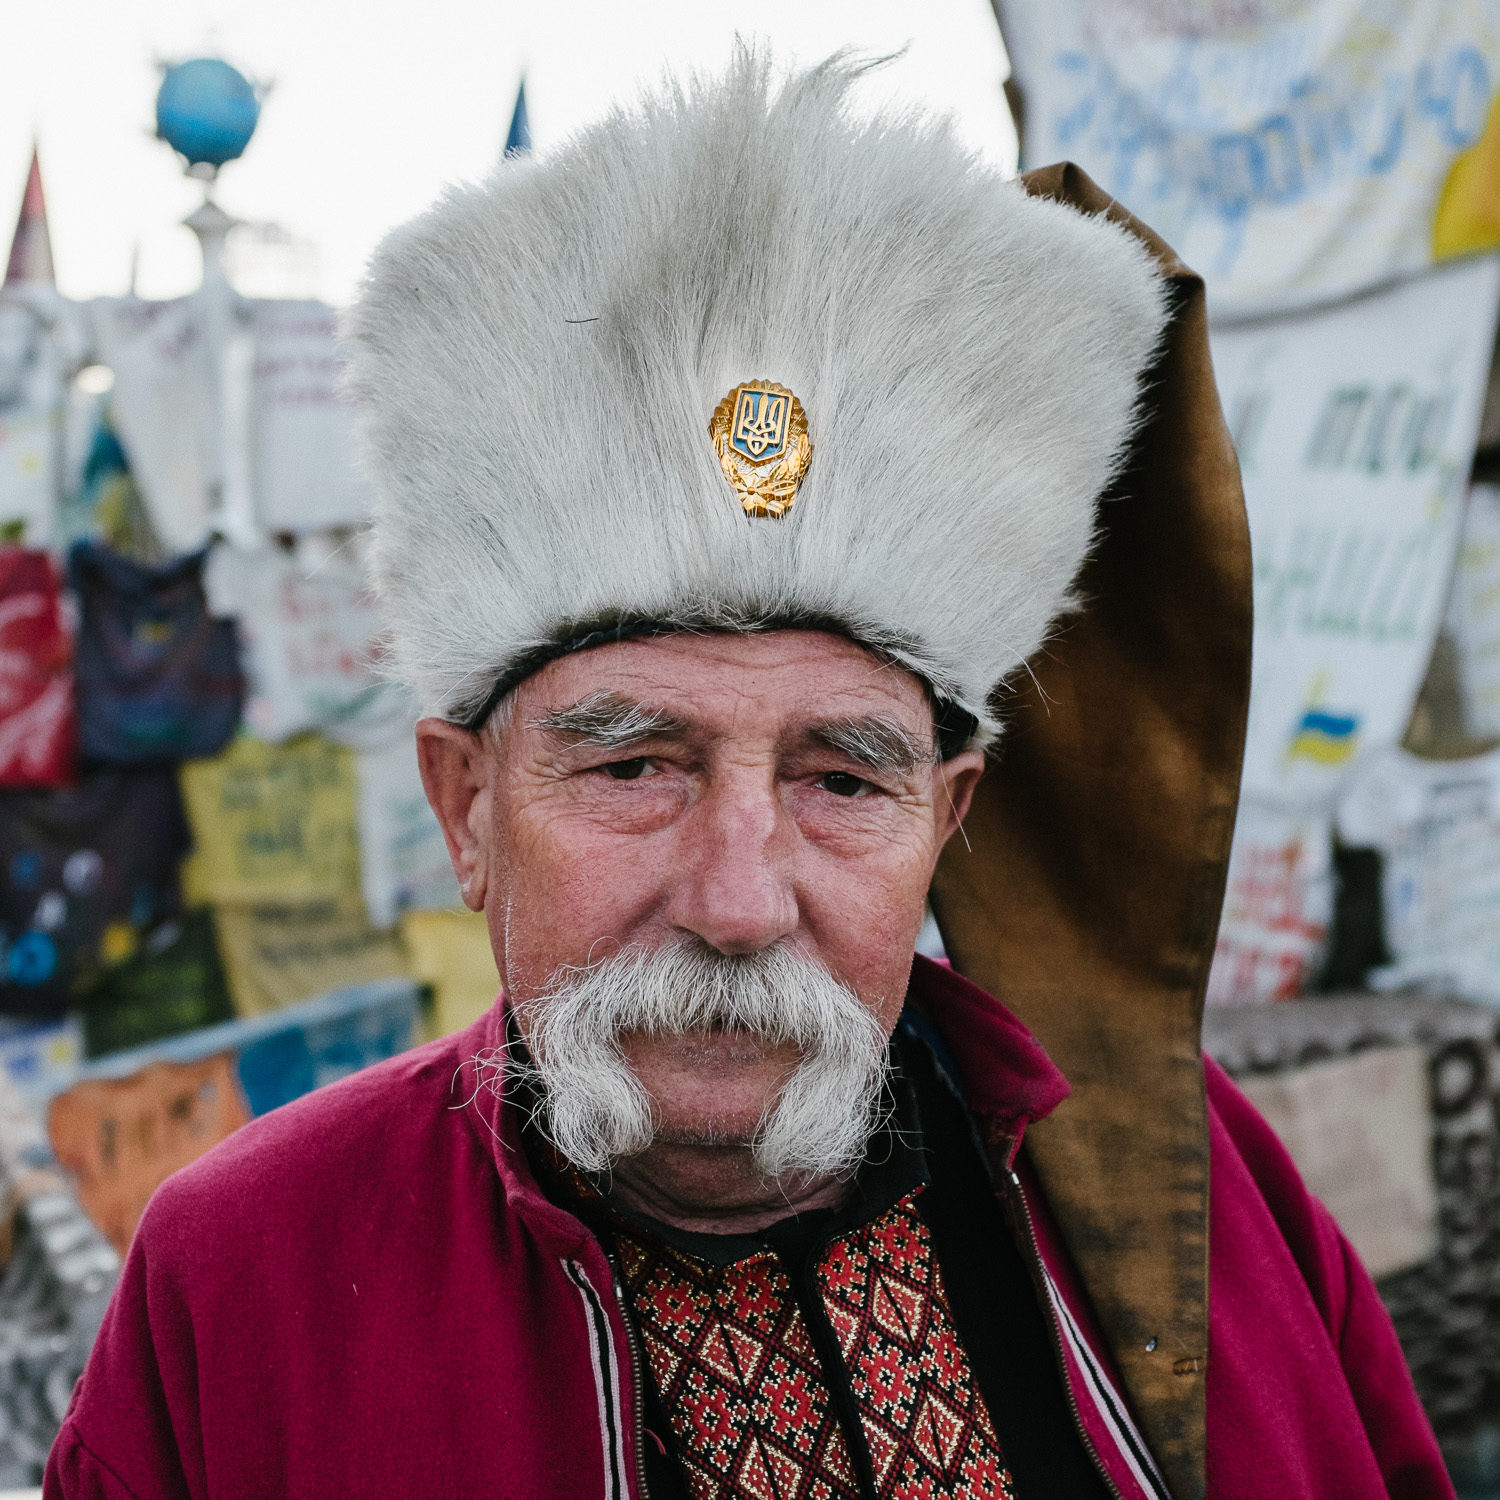  Taras Senik, a Cossack from the Lviv region of Ukraine, photographed on Kyiv's Independence Square, April 2014. 